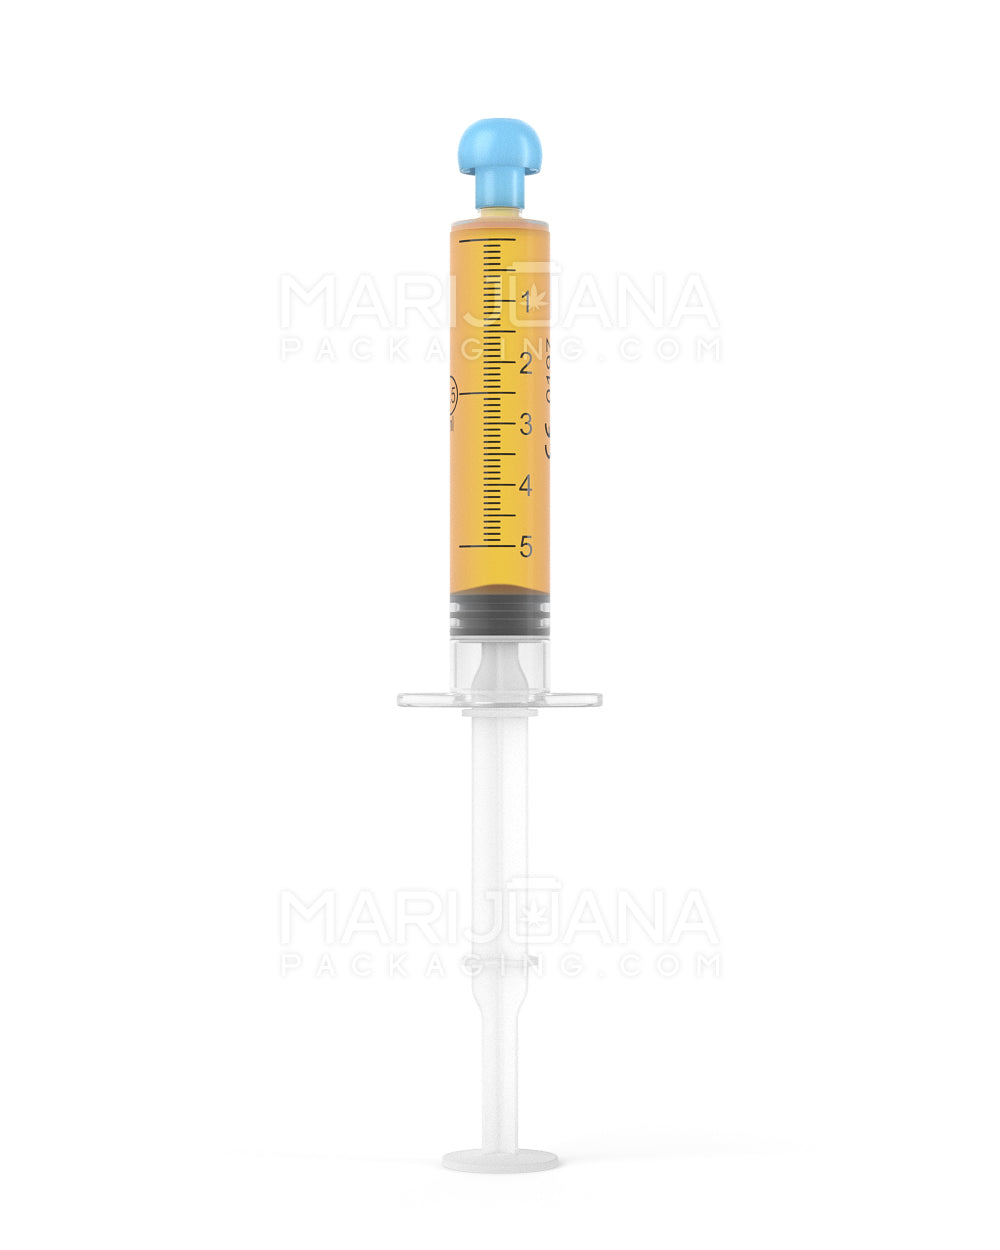 Plastic Oral Concentrate Syringes | 5mL - 1mL Increments - 100 Count - 2